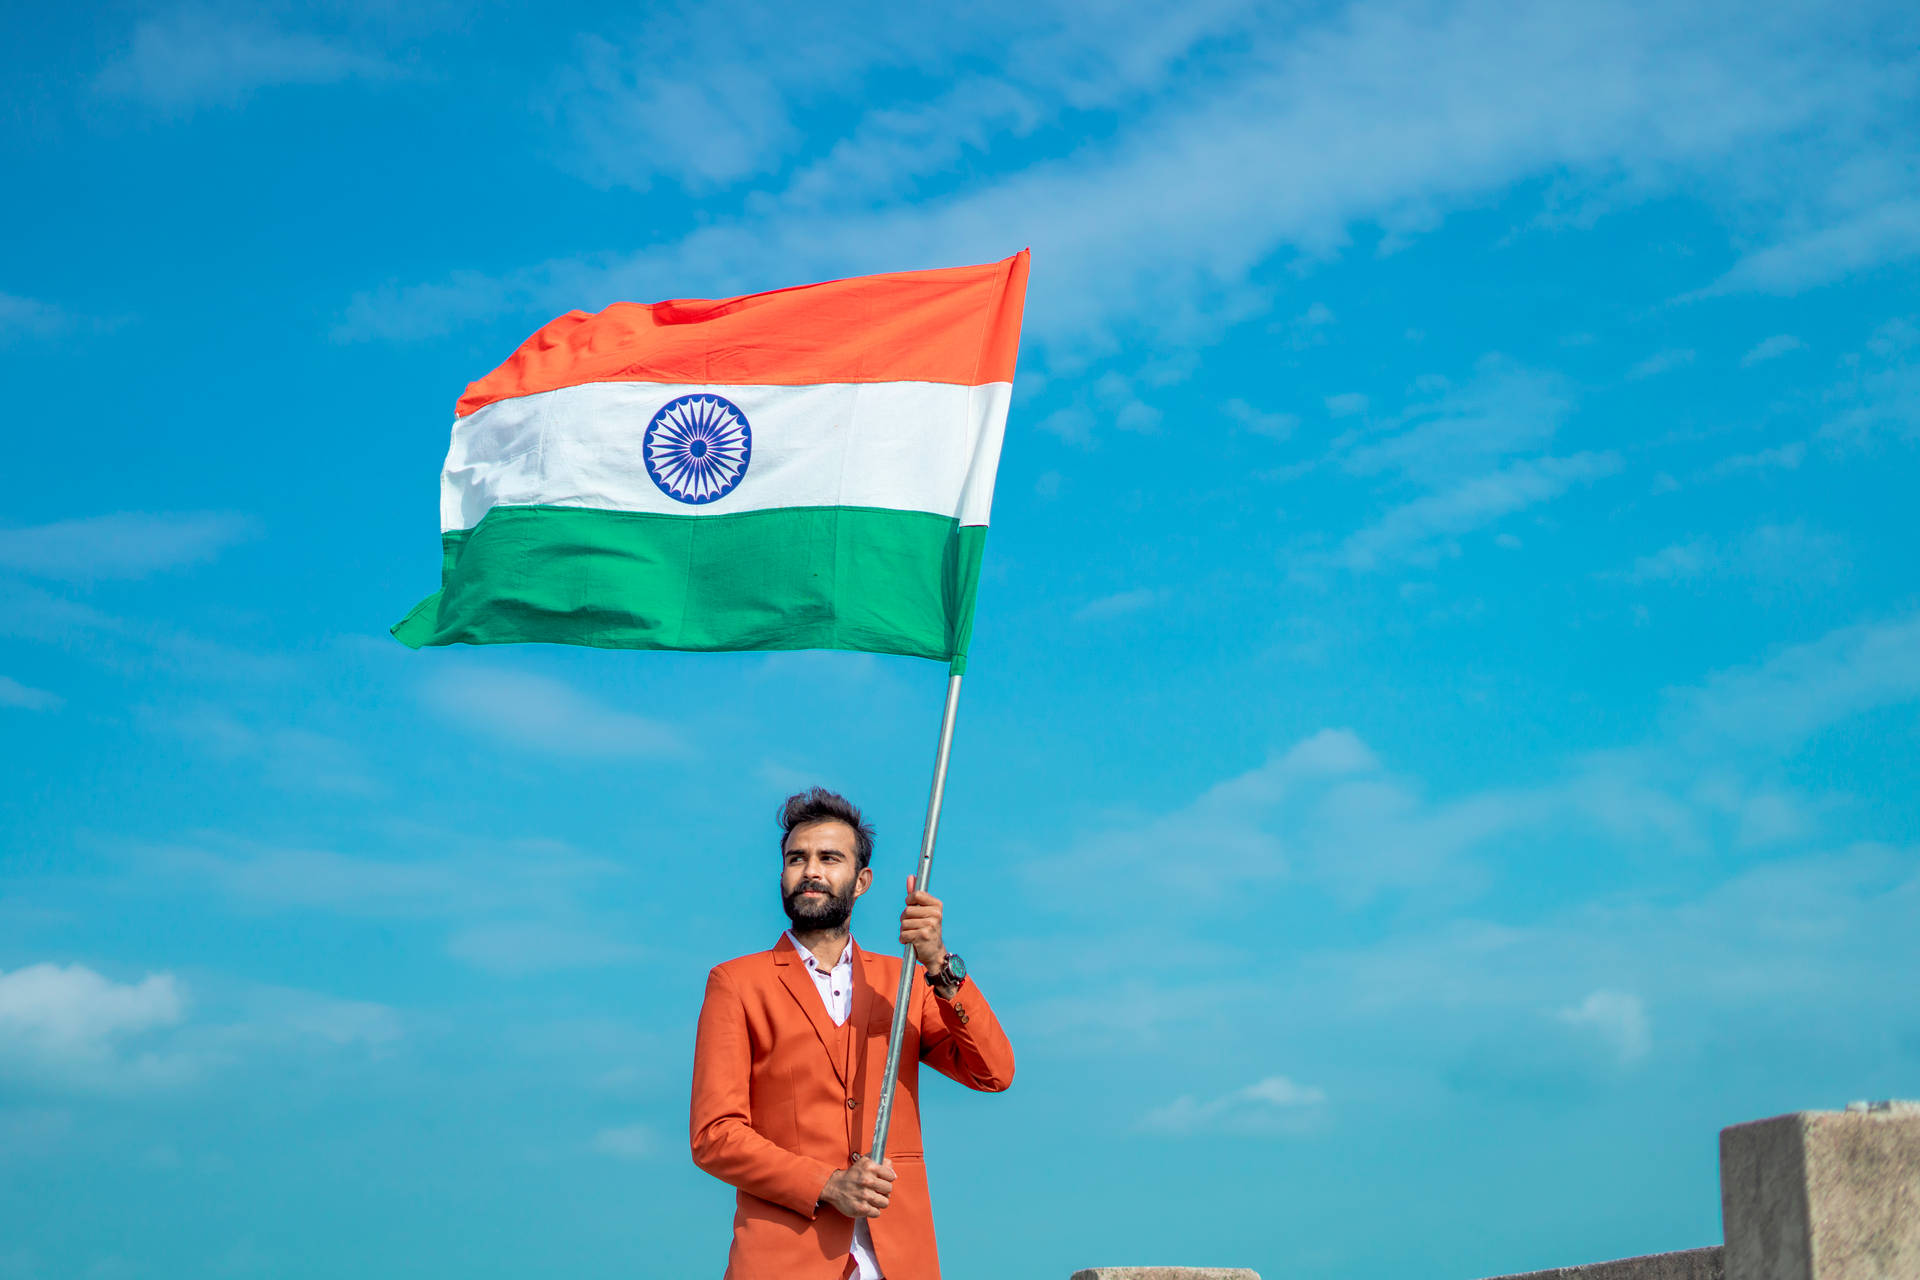 Tiranga Wallpapers and Picture Galleries